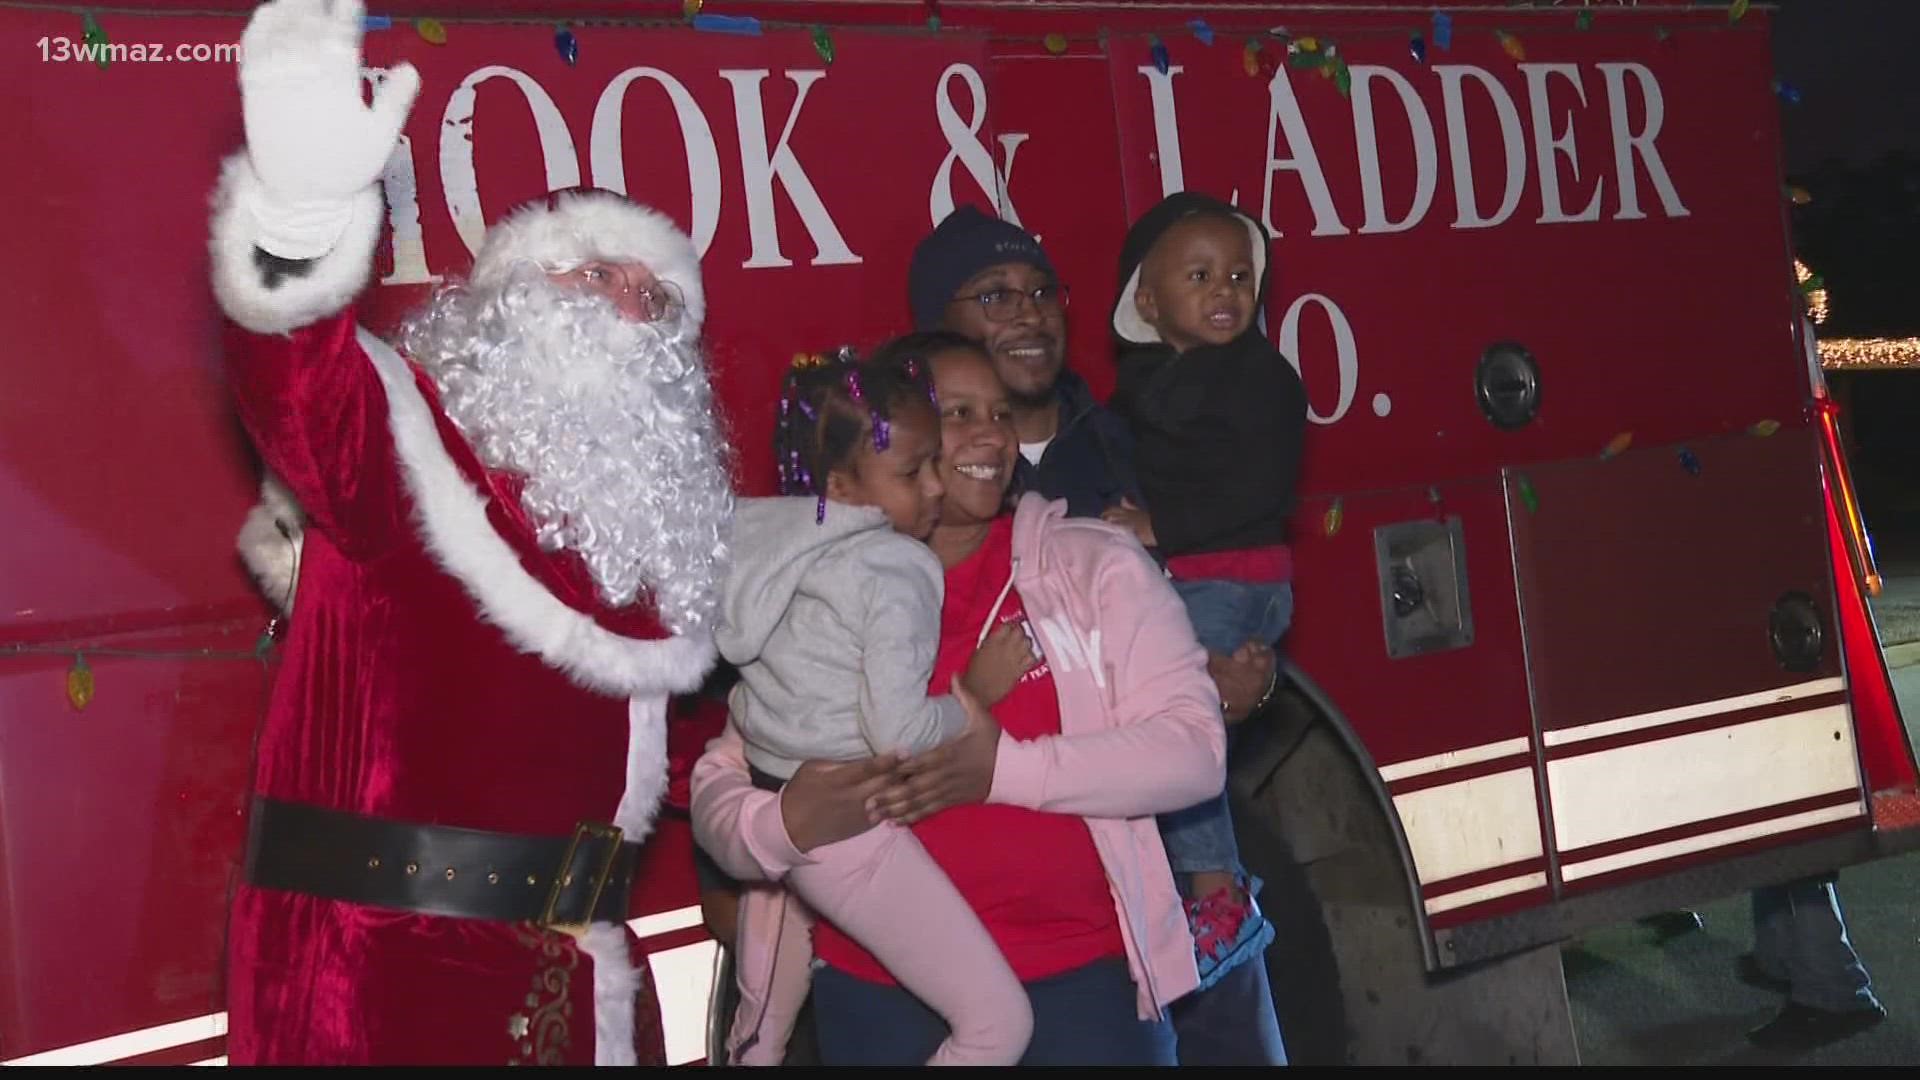 For the last three years, Houston County first responders have surprised the community with Santa visits, but they need your help to keep them going.